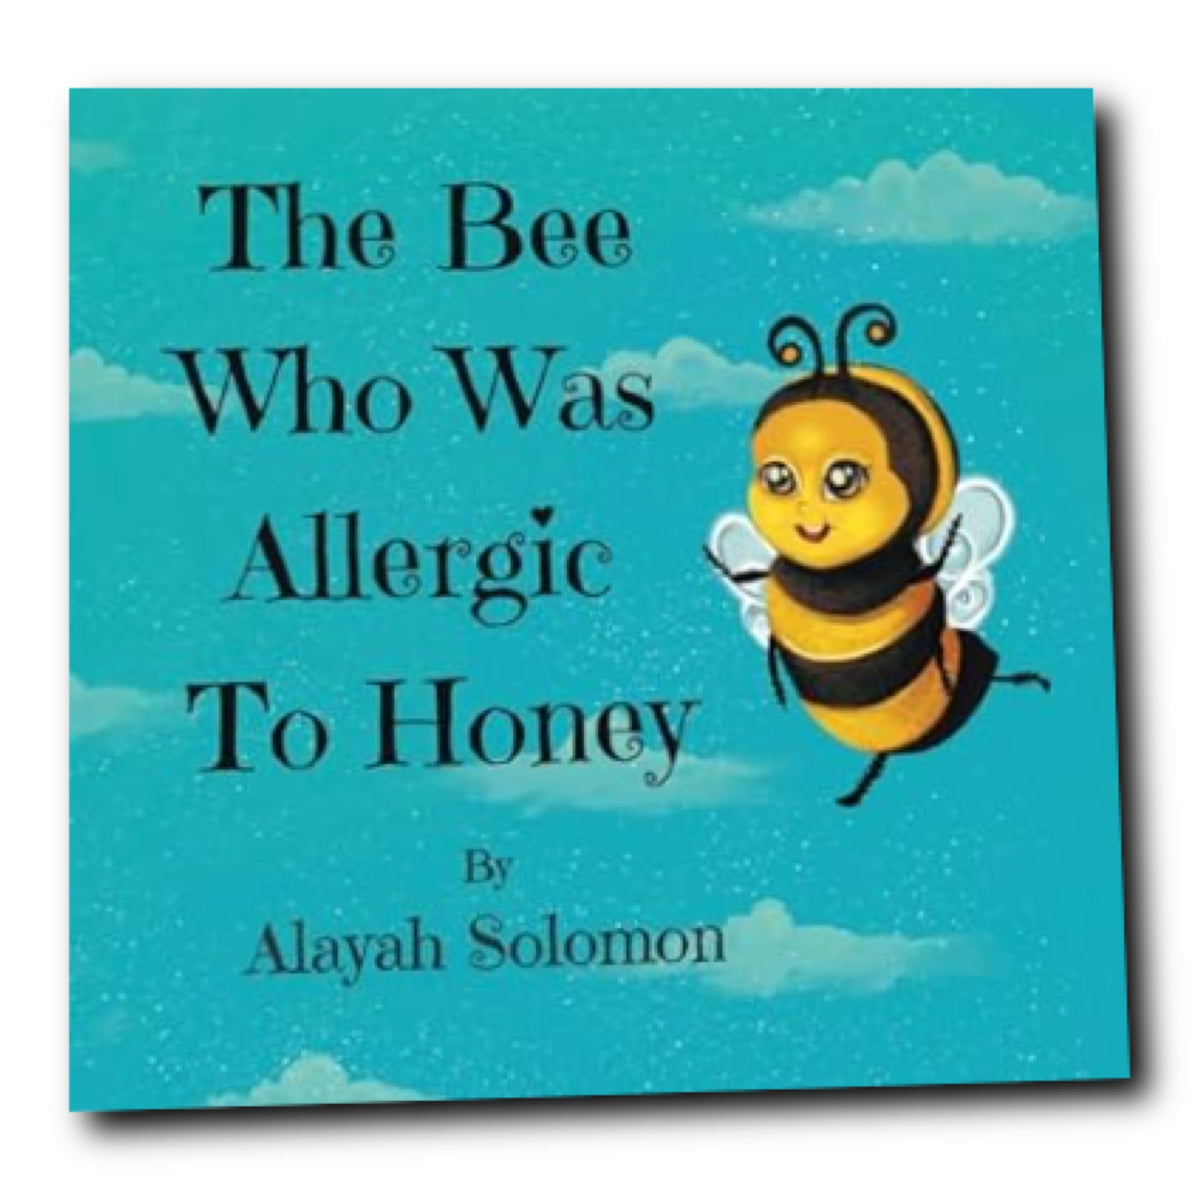 NCAT Aggie Student Author - The Bee Who Was Allergic To Honey